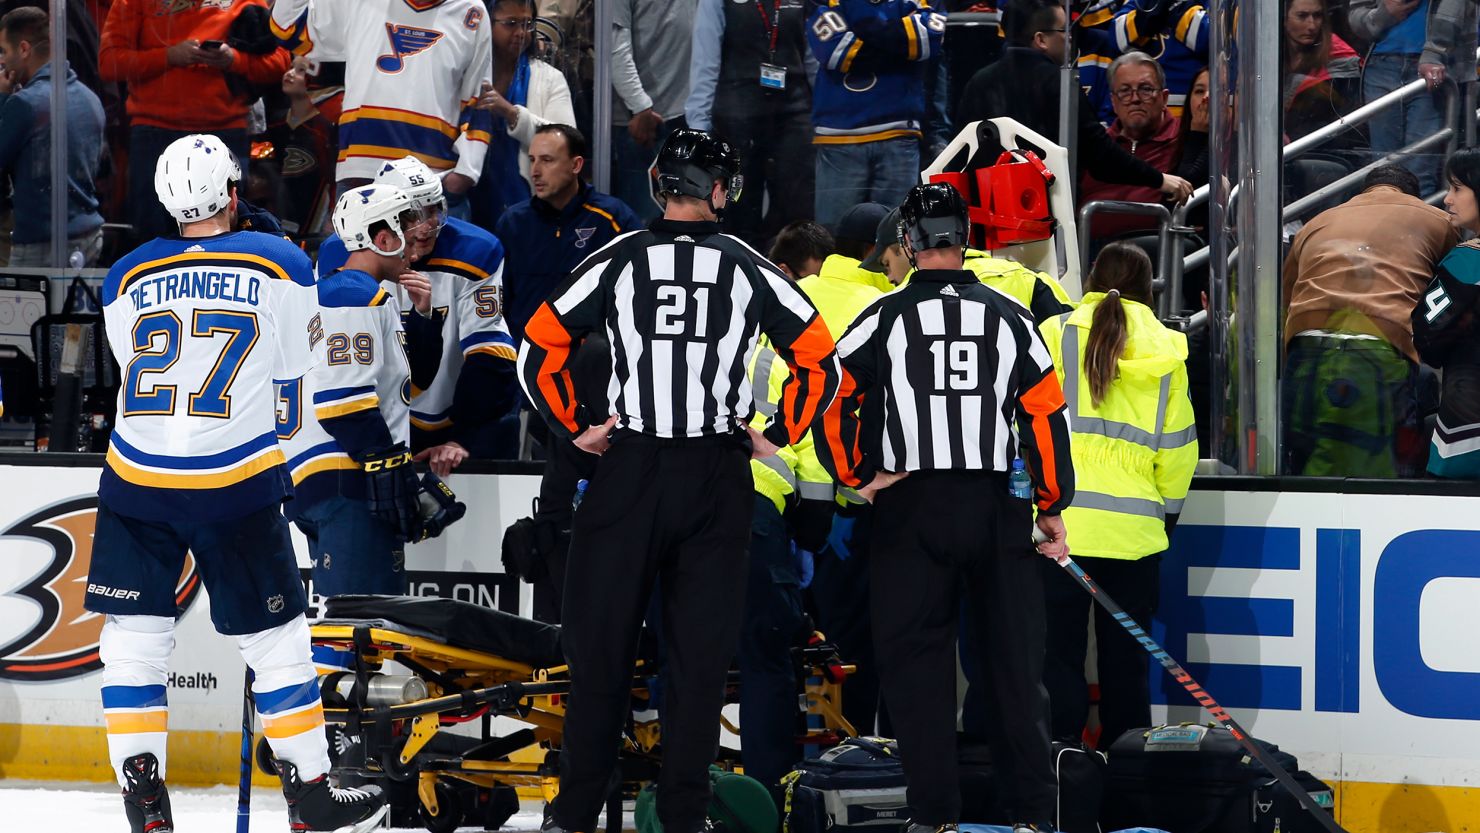 The St. Louis Blues watch as the paramedics tend to Jay Bouwmeester #19 of the St. Louis Blues after he collapsed on the bench during the first period of the game against the Anaheim Ducks at Honda Center on February 11, 2020 in Anaheim, California.